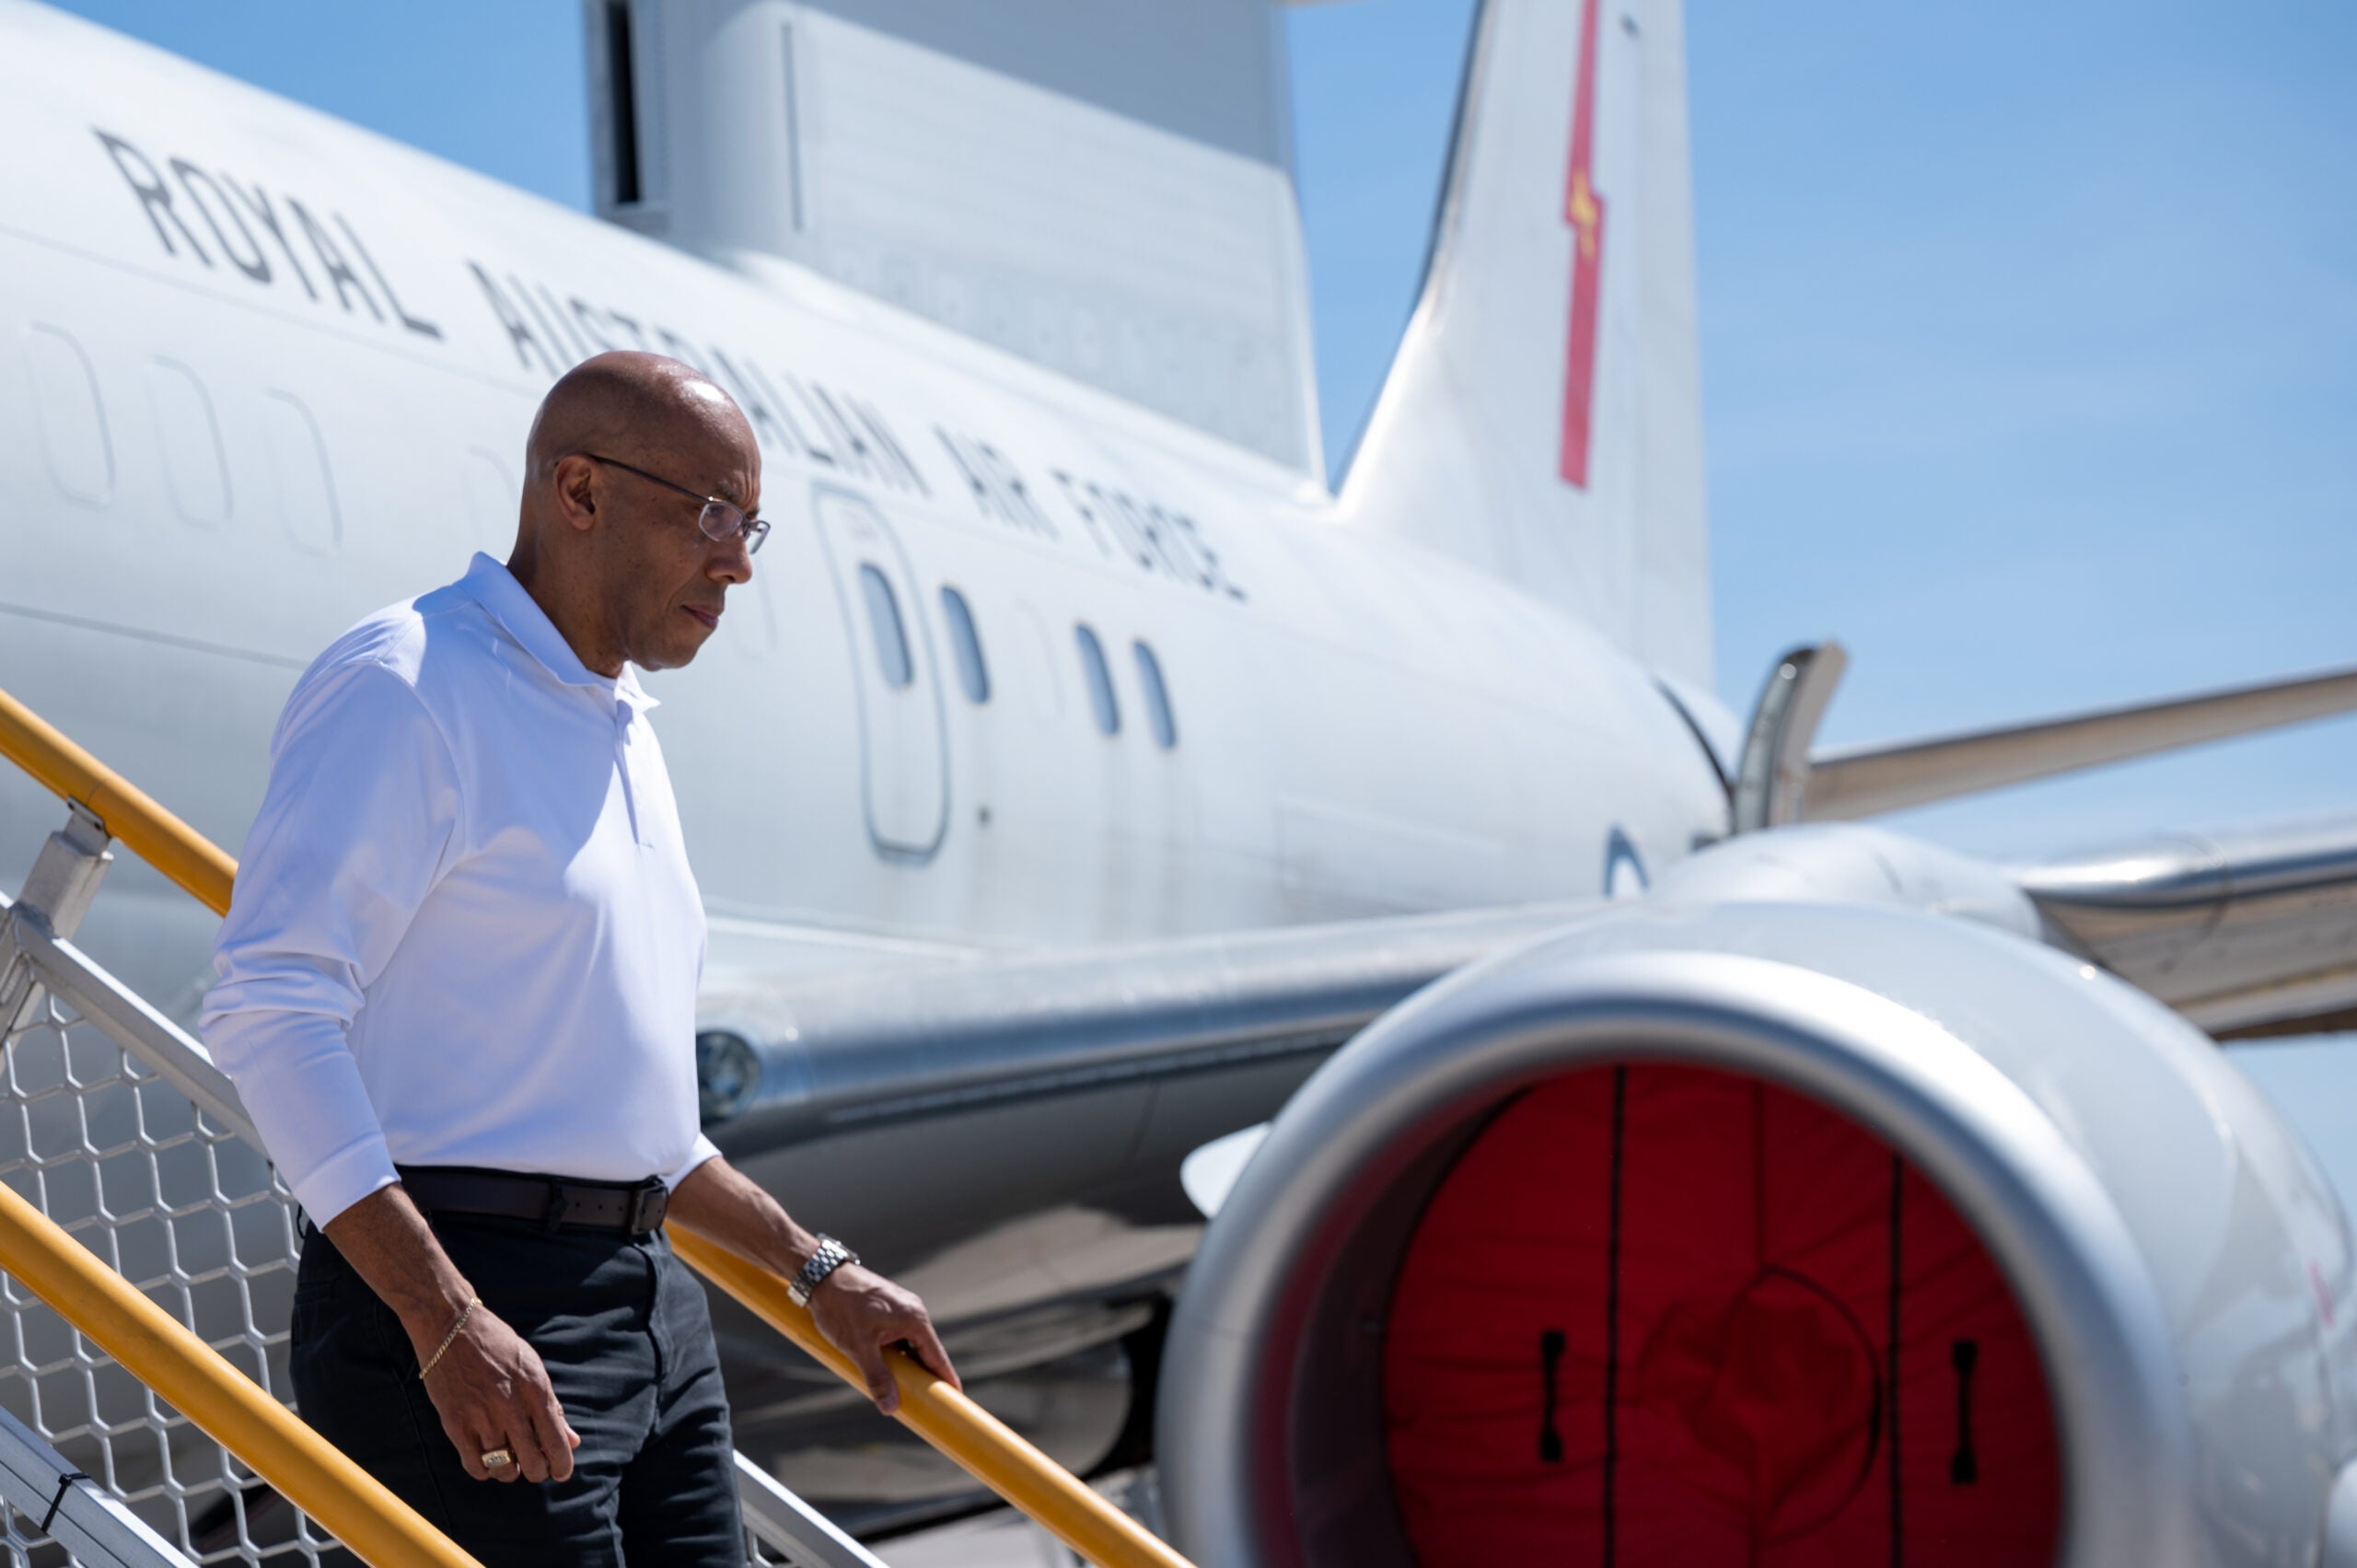 Air Force Chief of Staff Gen. Charles Q. Brown, Jr. tours the E-7A Wedgetail at Nellis Air Force Base, Nevada, May 6, 2022. The E-7A Wedgetail is equipped with a high-powered radar, used to monitor the battle space and provide friendly forces with an advantage over their opponents. (U.S. Air Force photo by Airman 1st Class Josey Blades)